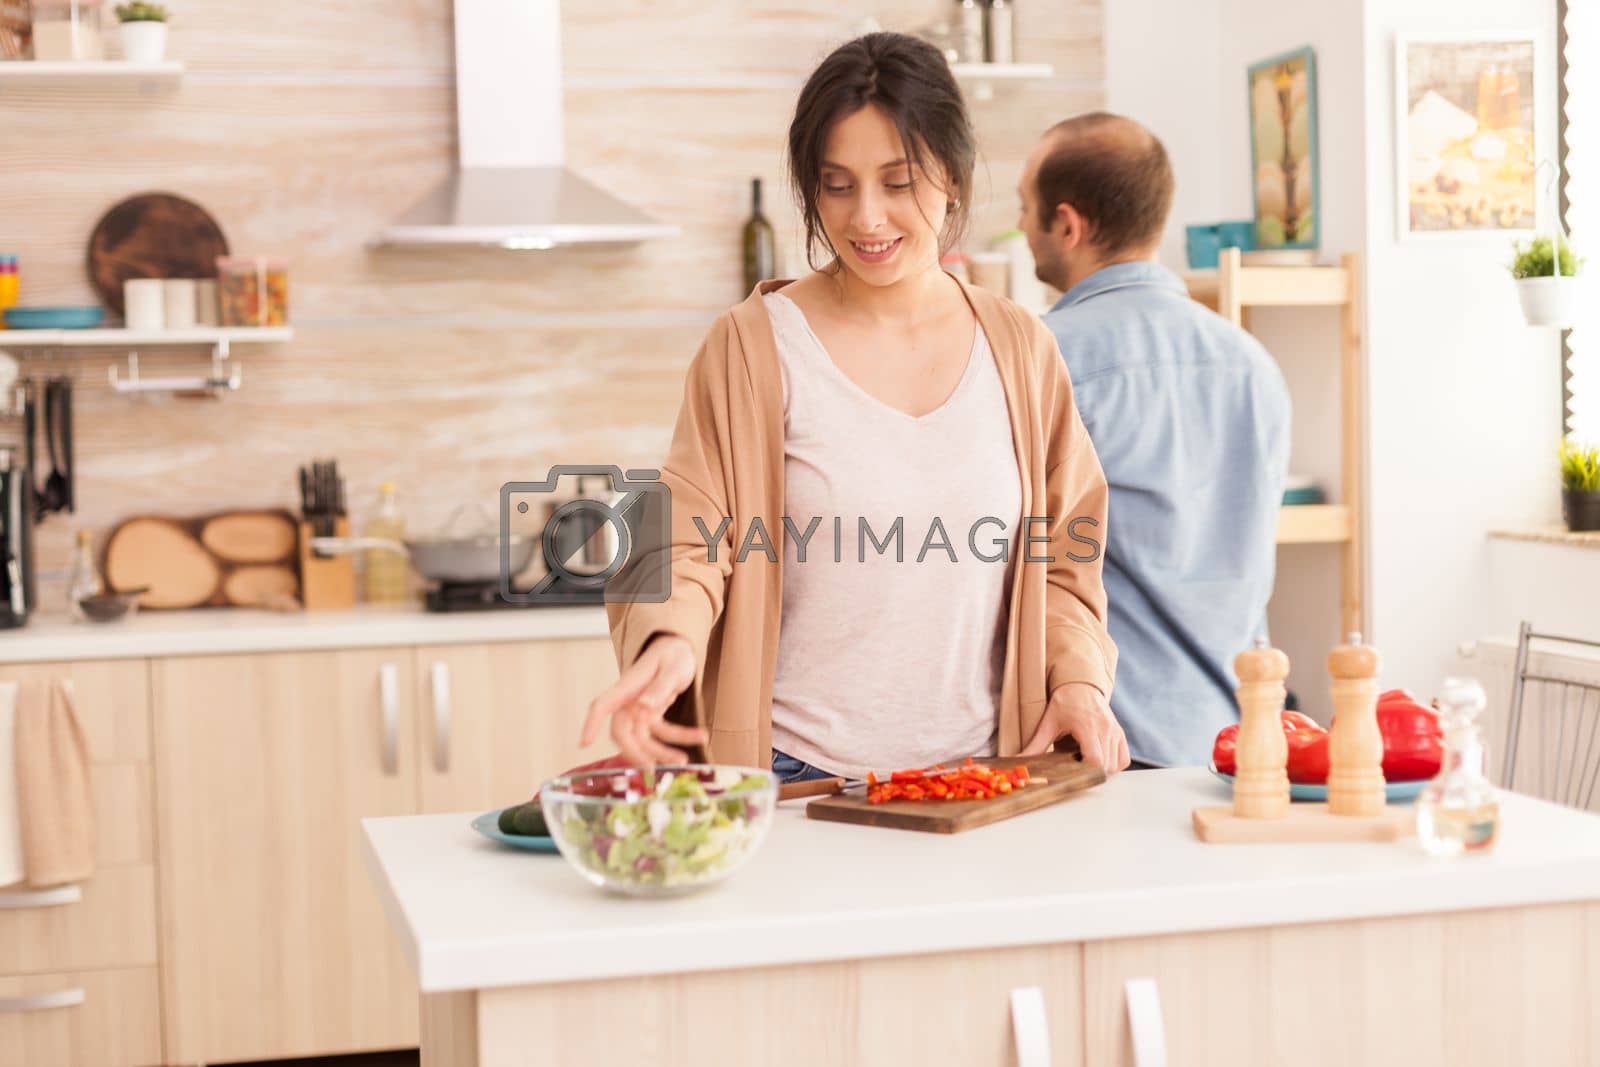 Royalty free image of WIfe reaching out for salad bowl by DCStudio